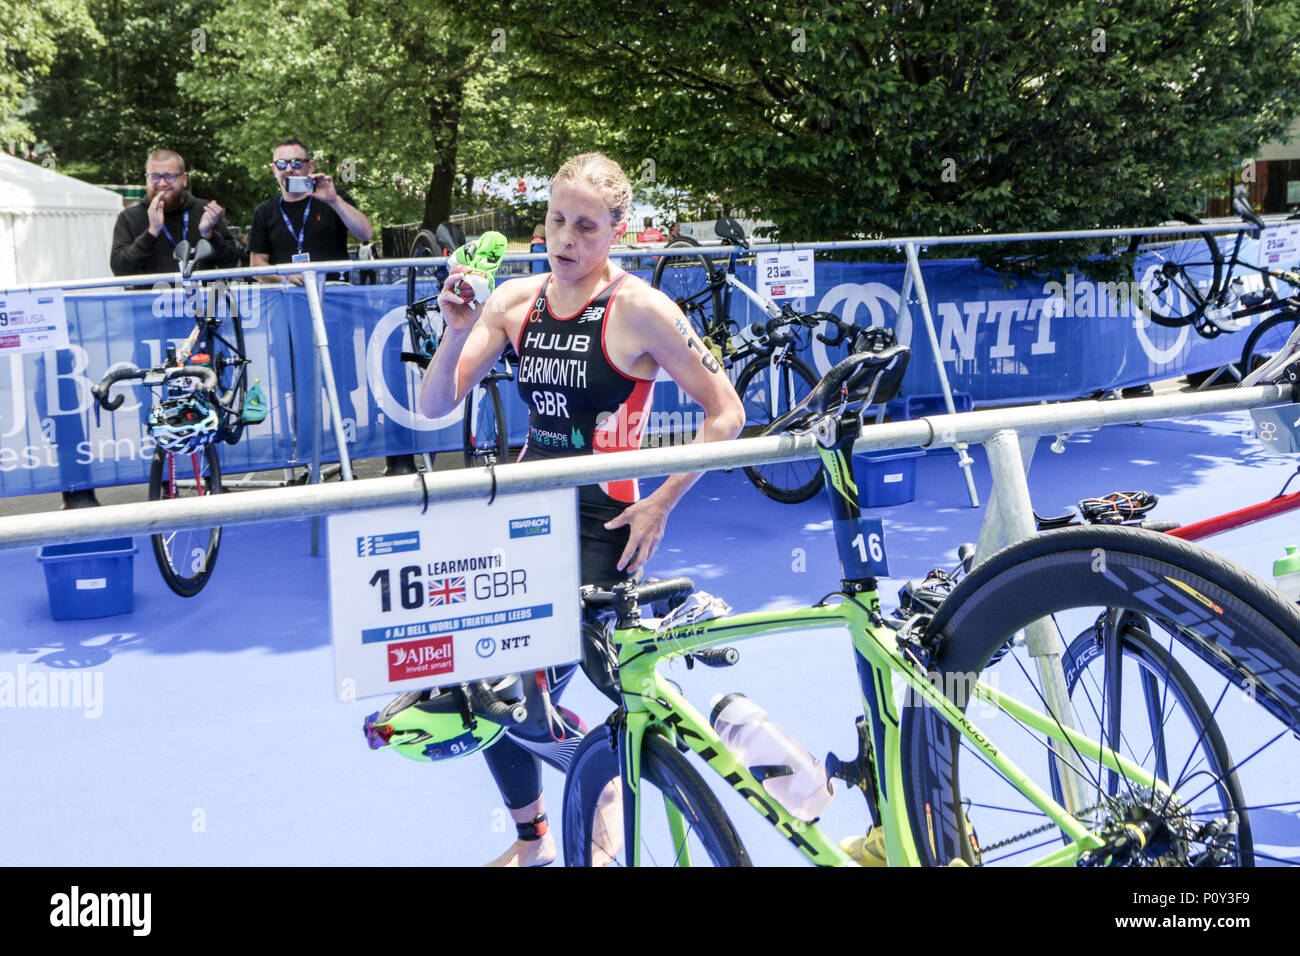 Leeds, UK. 10th June 2018. Jessica Learmonth of Great Britain enters t1 in first place  in the Elite Womens race.   Credit: Dan Cooke Credit: Dan Cooke/Alamy Live News Stock Photo